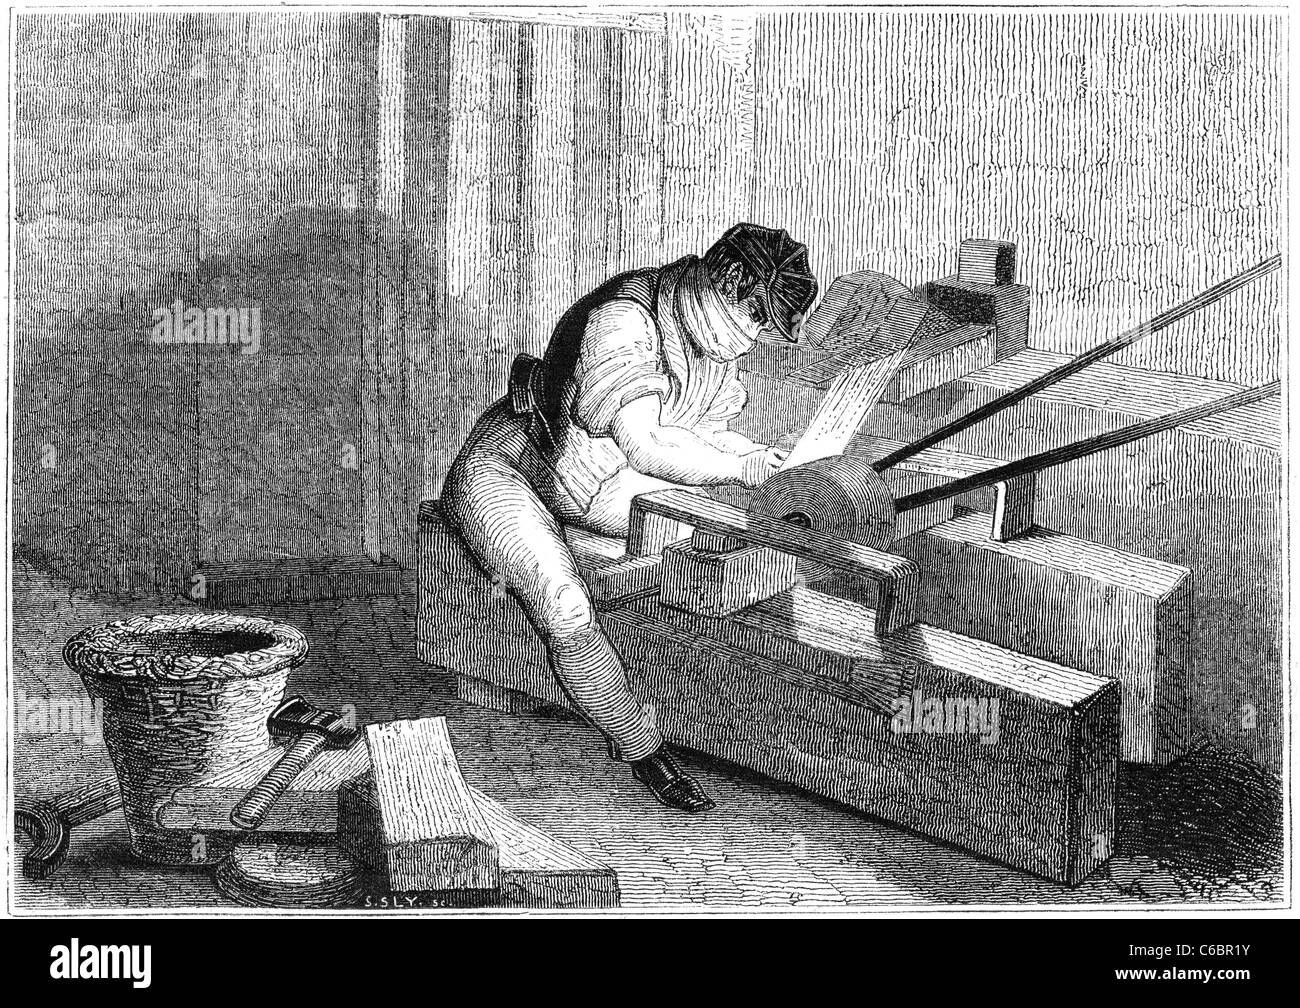 A Day at the british needle-mills, Redditch: Needle-pointer at work. Illustration from a british magazine printed in 1843. Stock Photo